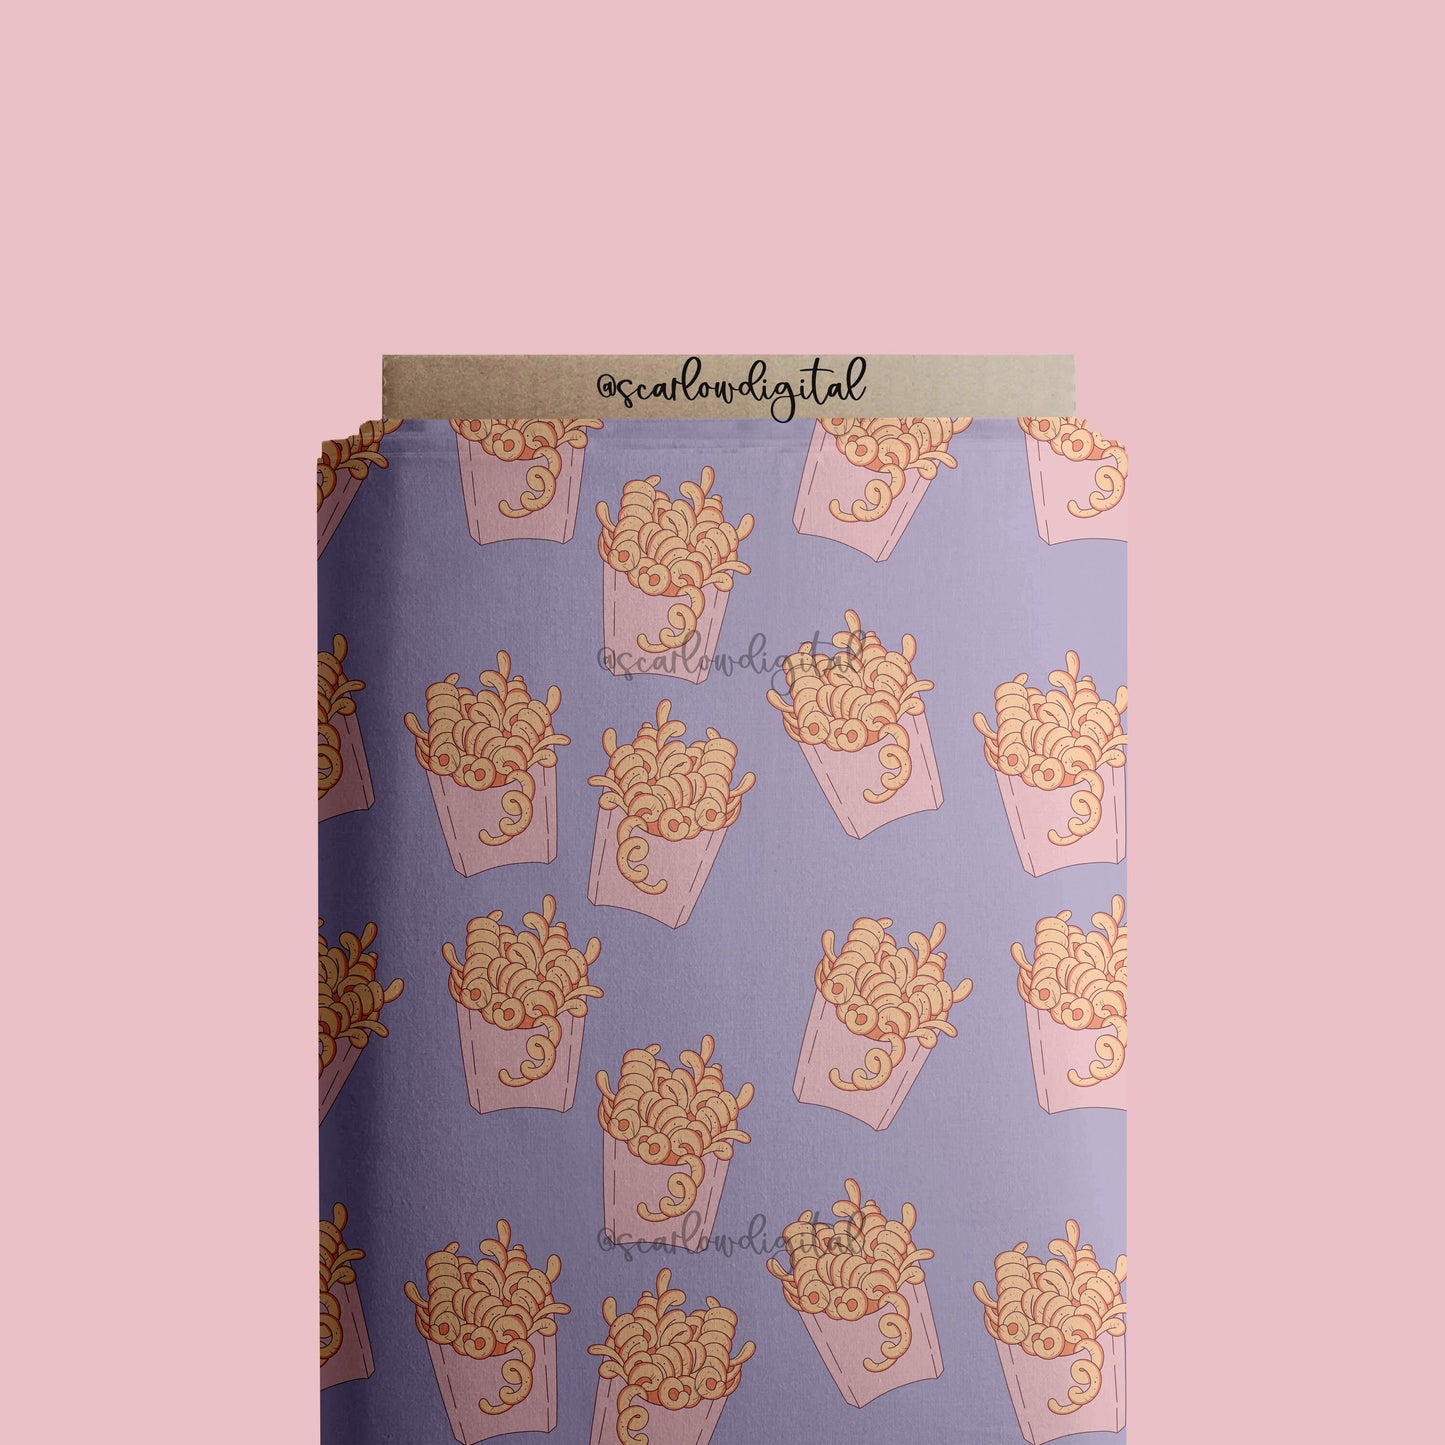 French Fry Seamless Pattern-Valentines Day Digital Design Download-fries before guys seamless pattern, girl sublimation, girly seamless